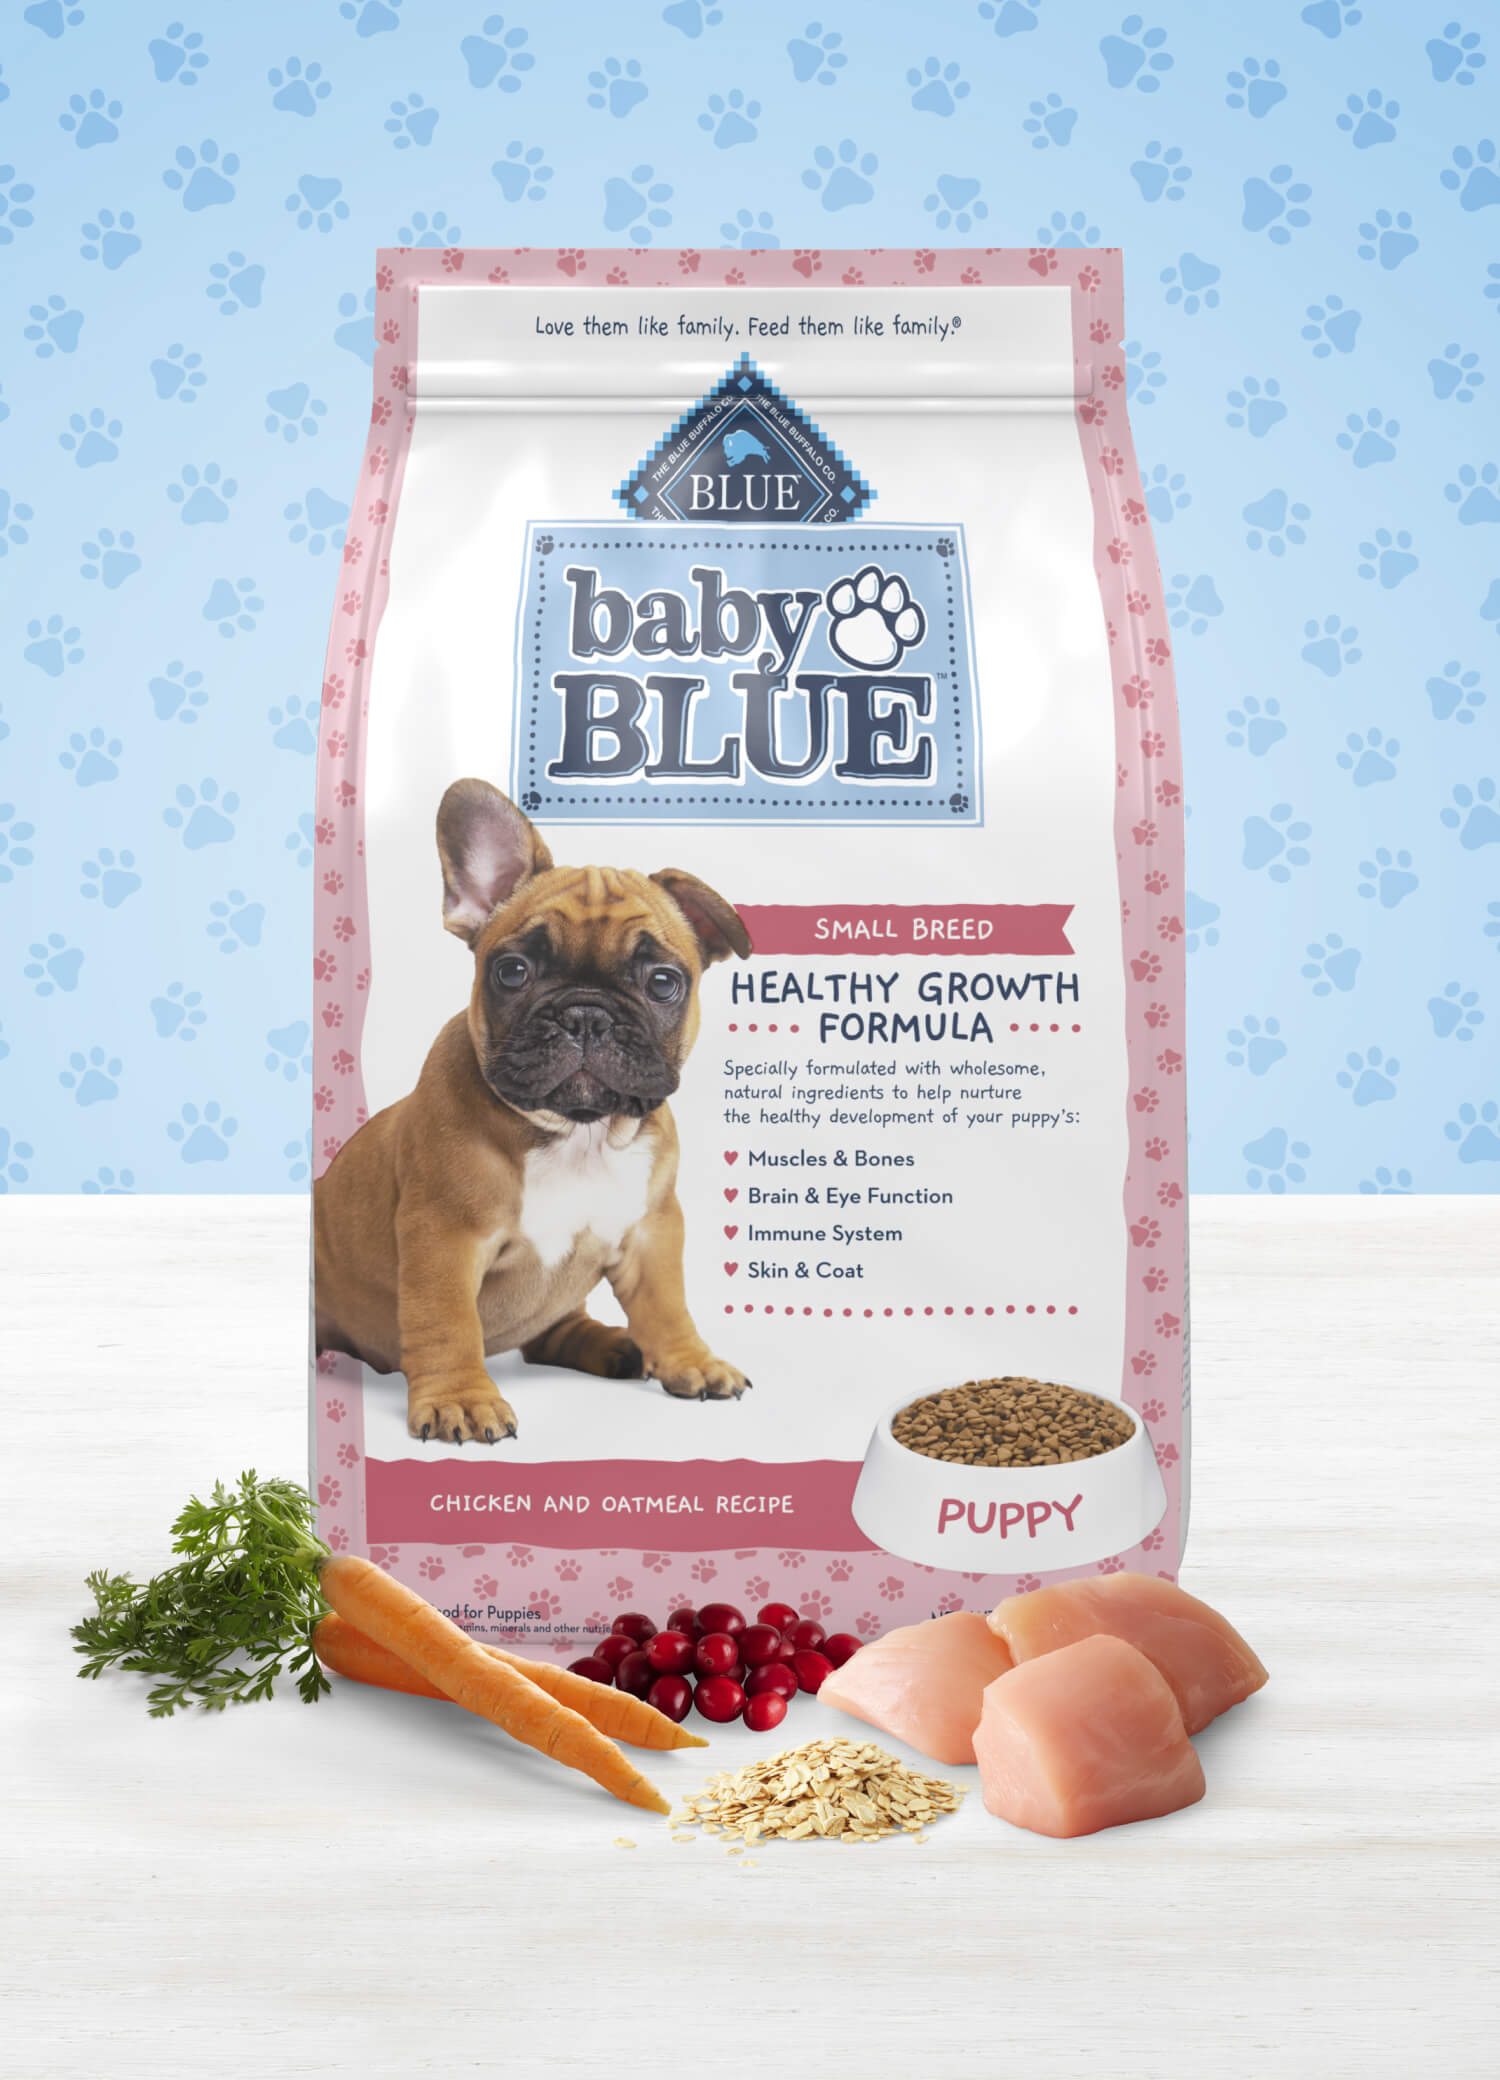 A bag of BLUE Baby BLUE Healthy Growth Formula Chicken and Oatmeal Recipe for Small Breed Puppies dry food